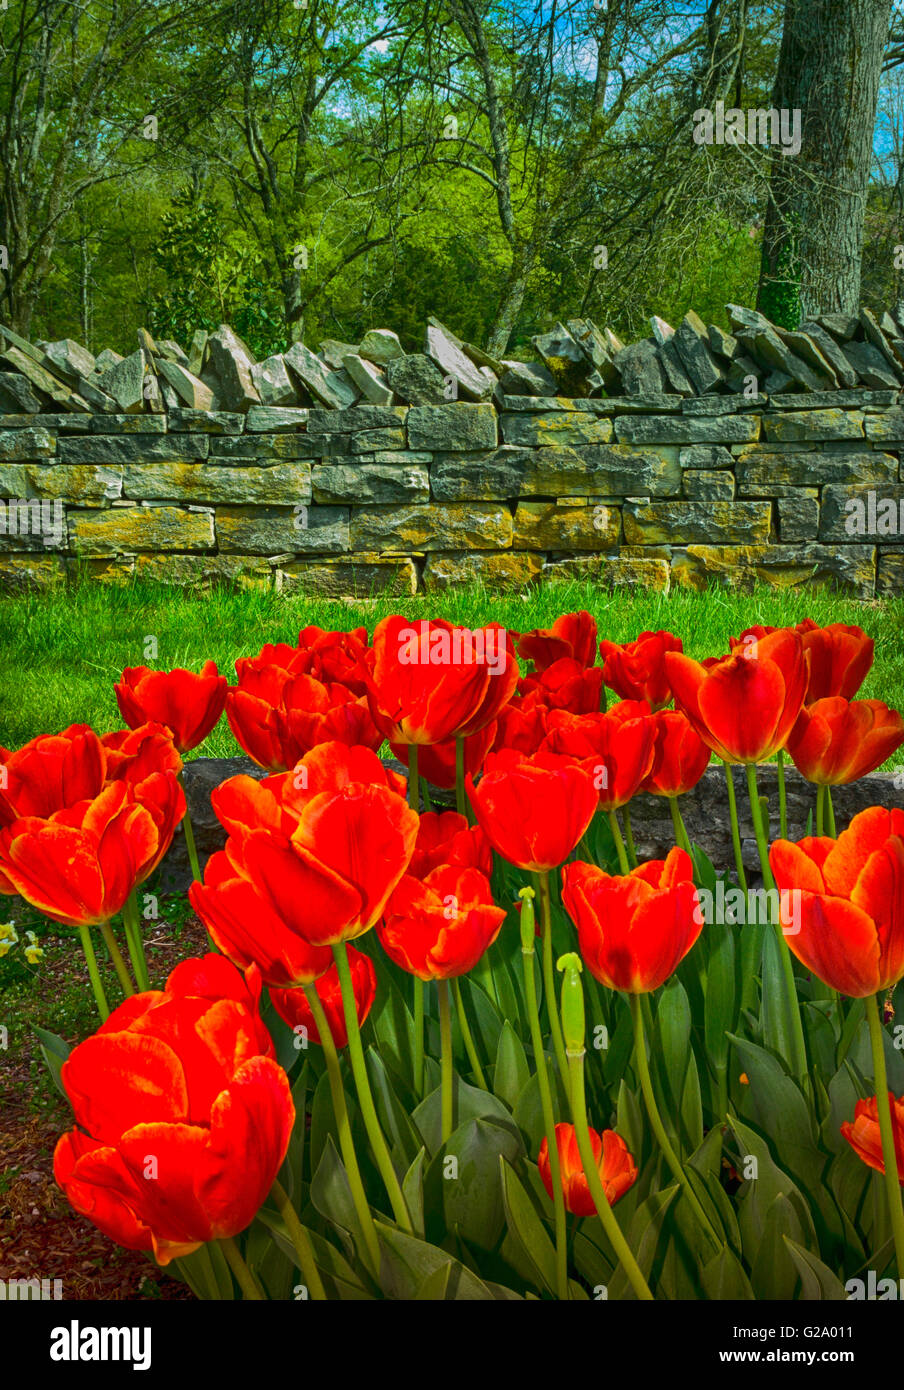 Red tulips dazzle in garden surrounded by old stone wall constructed in a dry stack method with vertical capstones and lichen Stock Photo